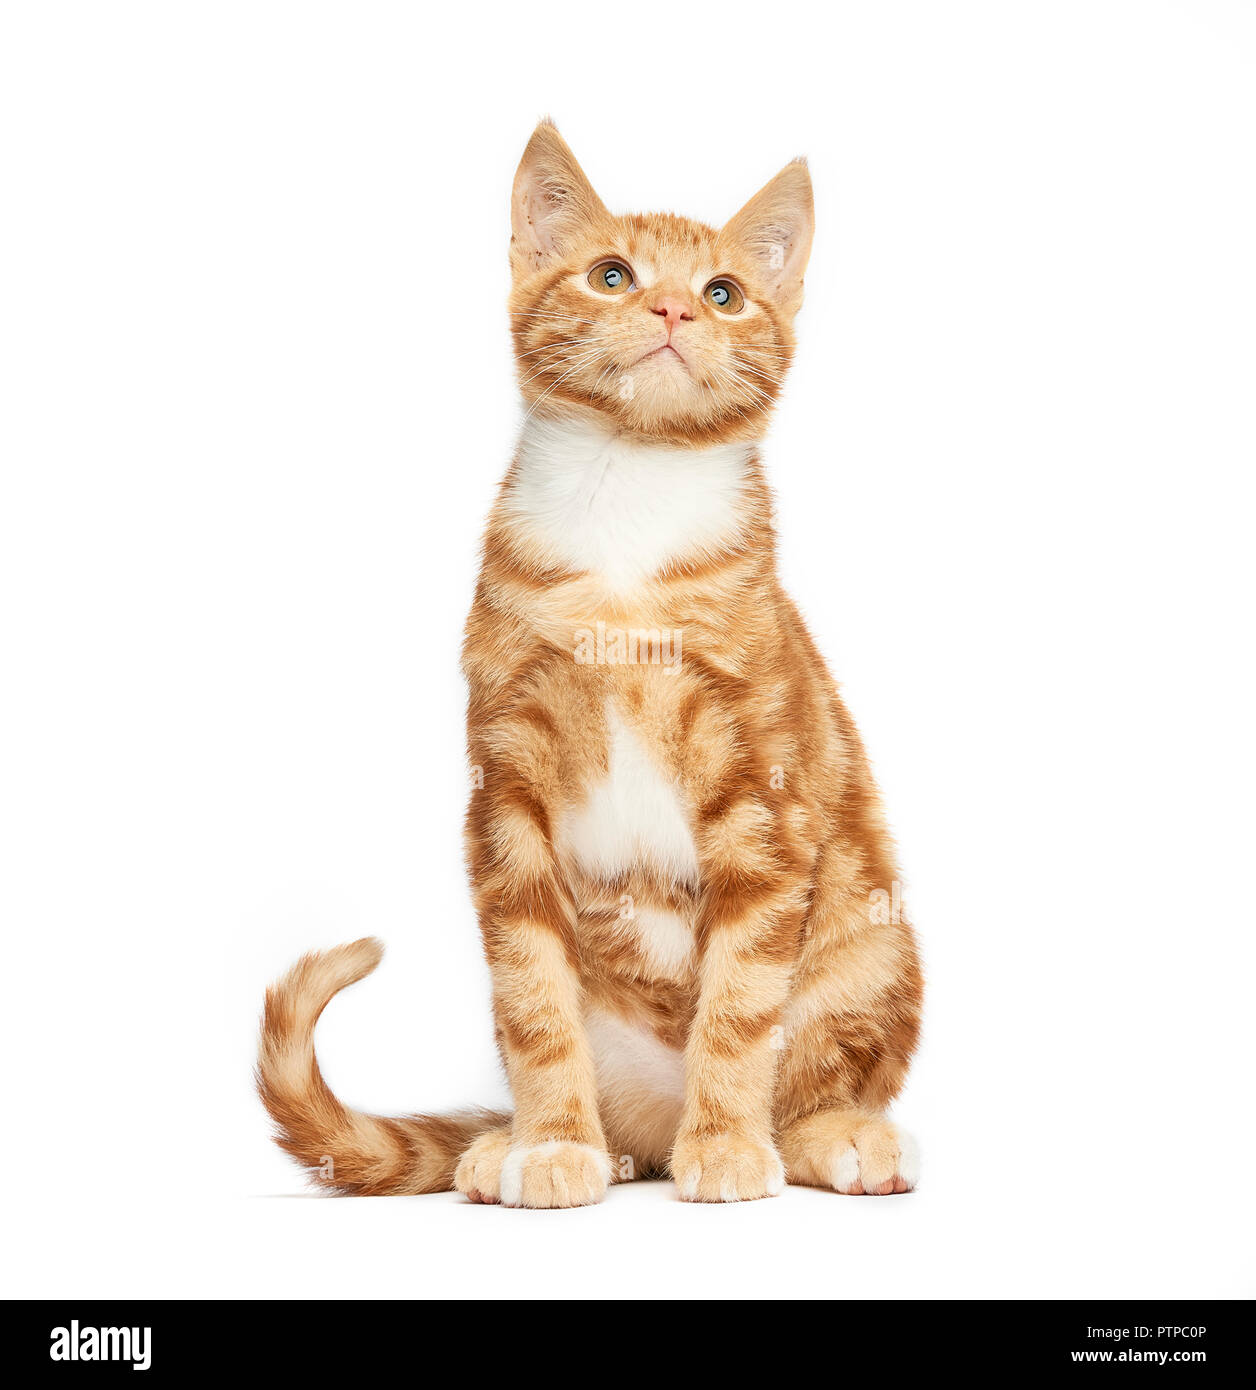 Adorable ginger red tabby kitten sitting isolated on a  white background, looking up. Stock Photo